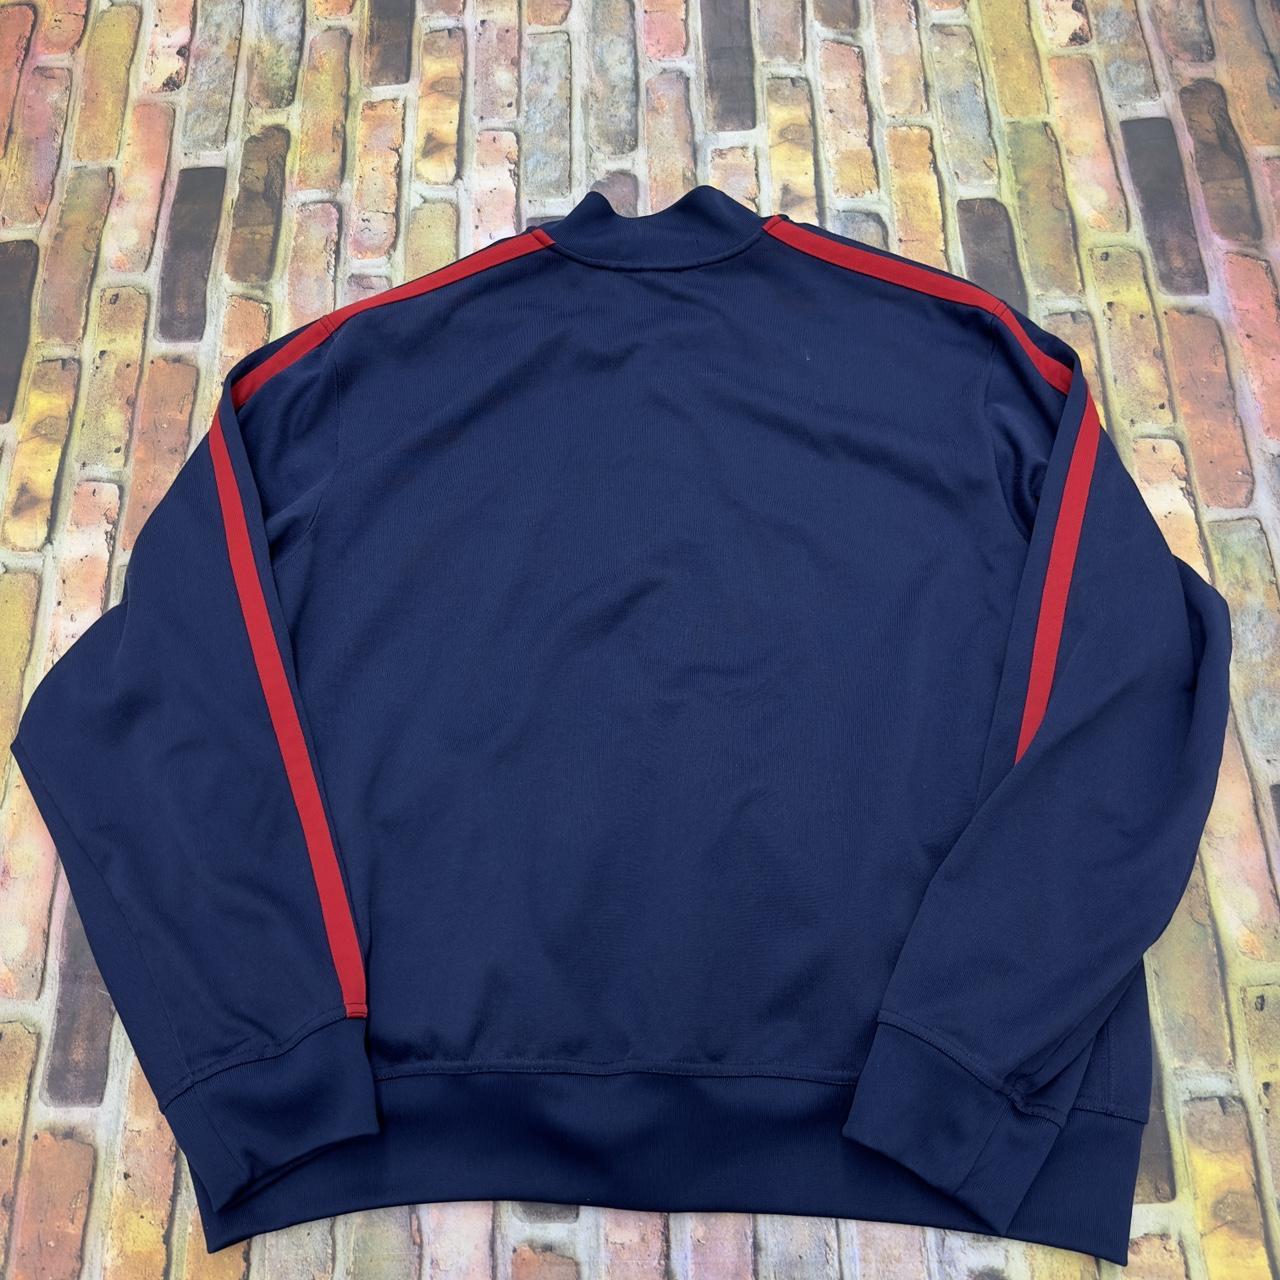 Vintage Polo Sport button up bomber jacket in navy.... - Depop